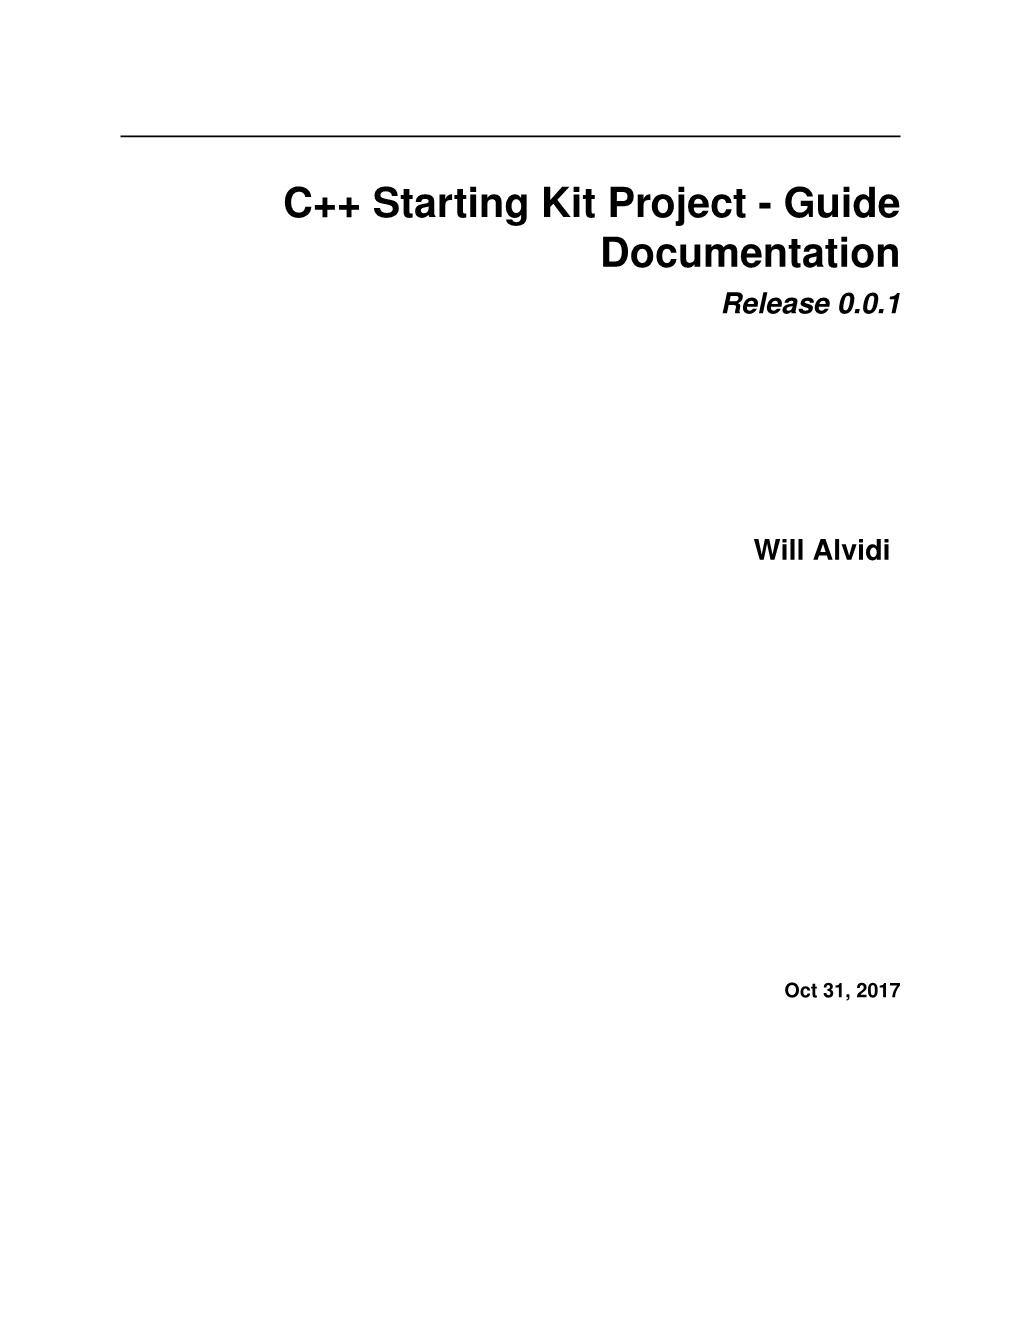 C++ Starting Kit Project - Guide Documentation Release 0.0.1